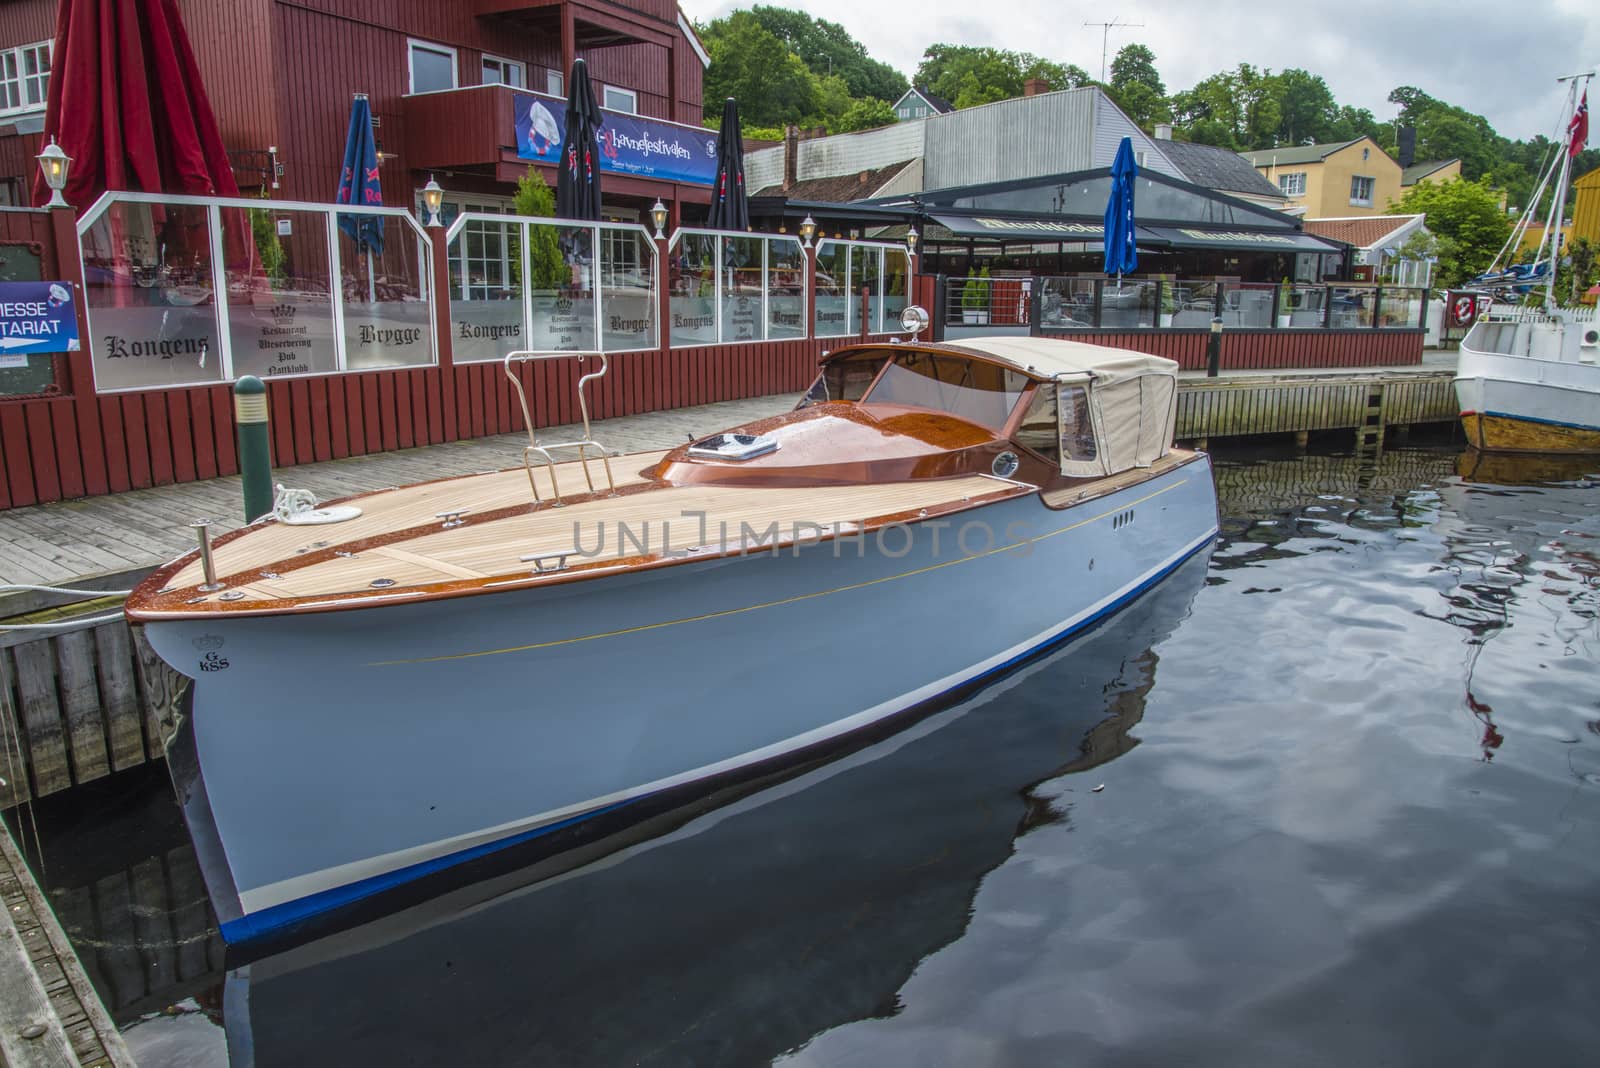 The boat is on display at the harbor during Halden food and harbor festival which is held every year on the last weekend of June. The deck of the boat is built in teak and mahogany. Halden, Norway.